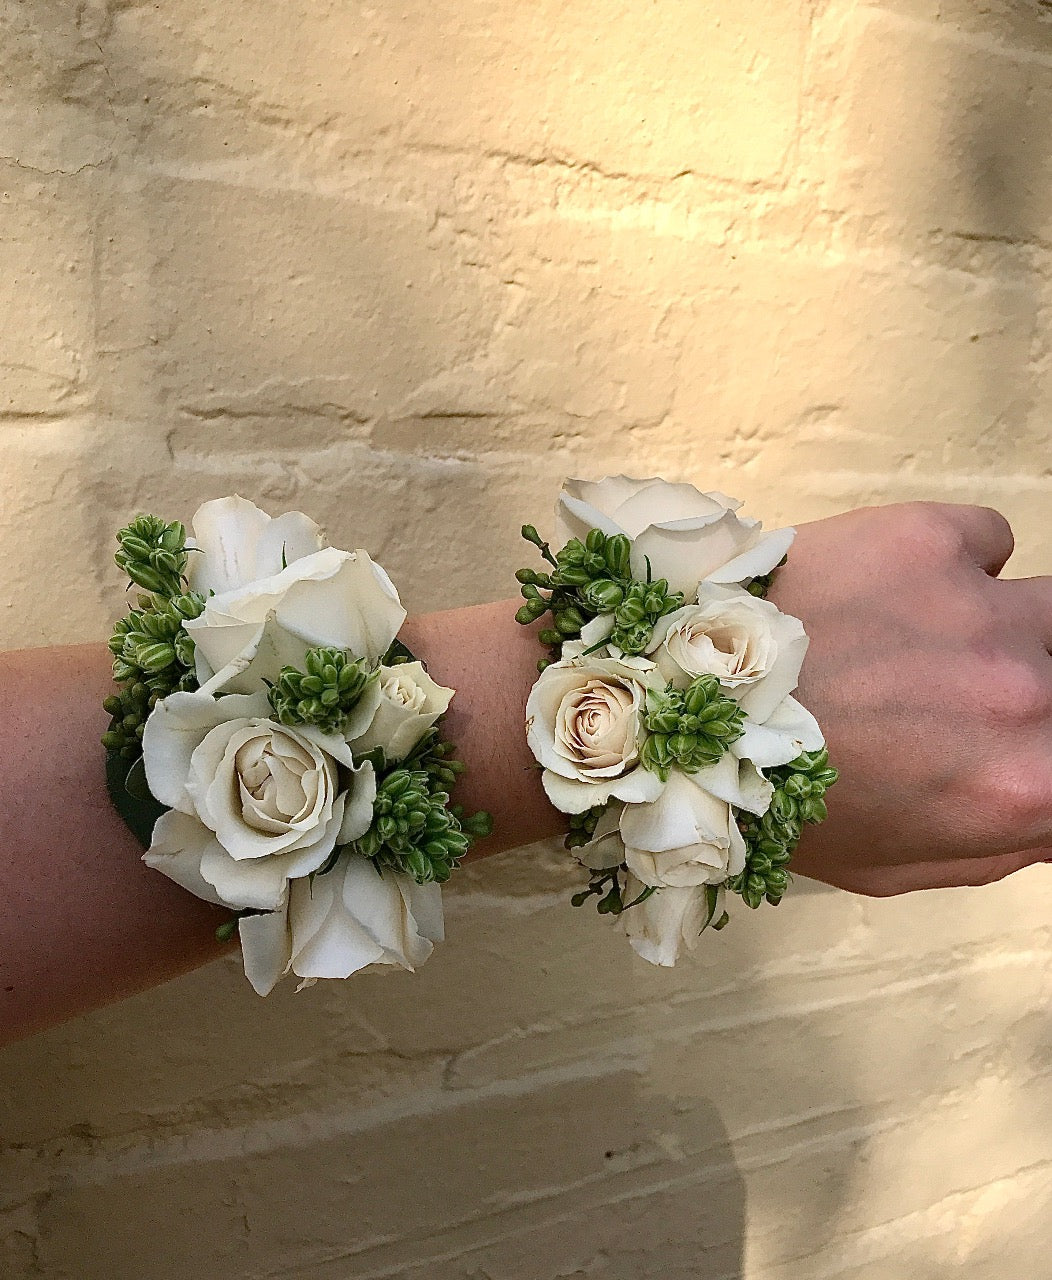 18 Chic and Stylish Wrist Corsage Ideas You Can't Miss! #weddings